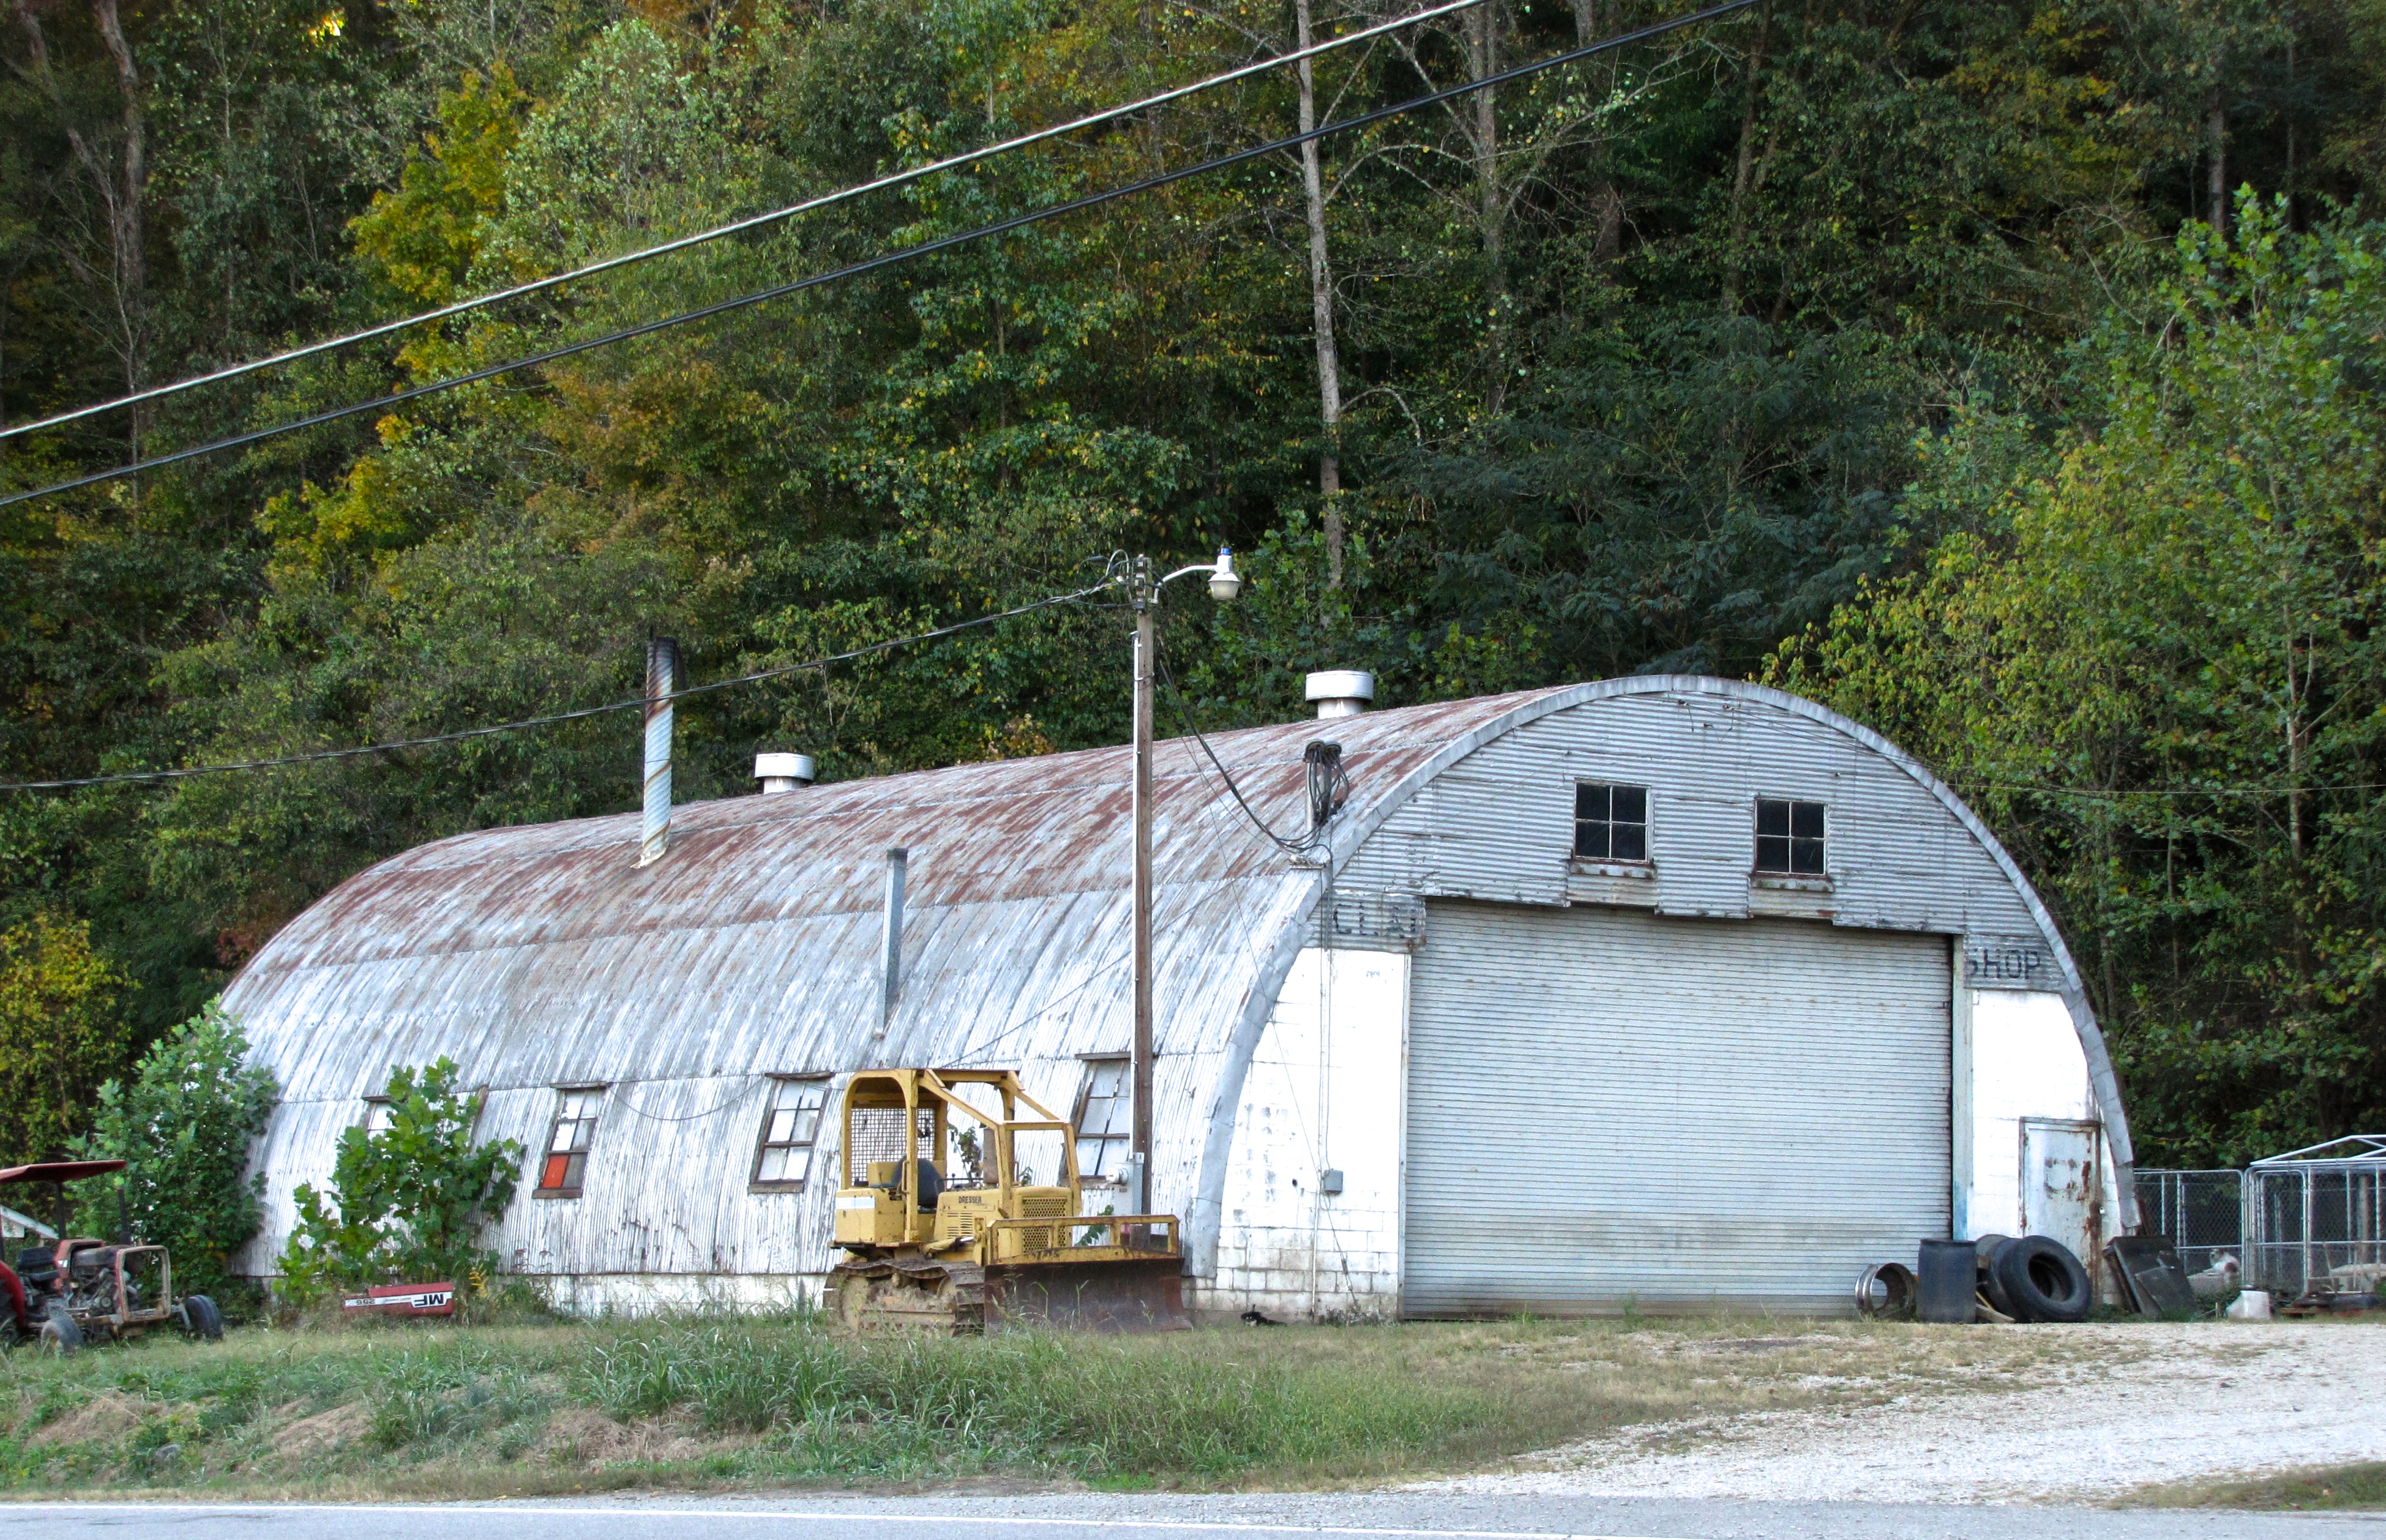 quonset hut in Angola, IN